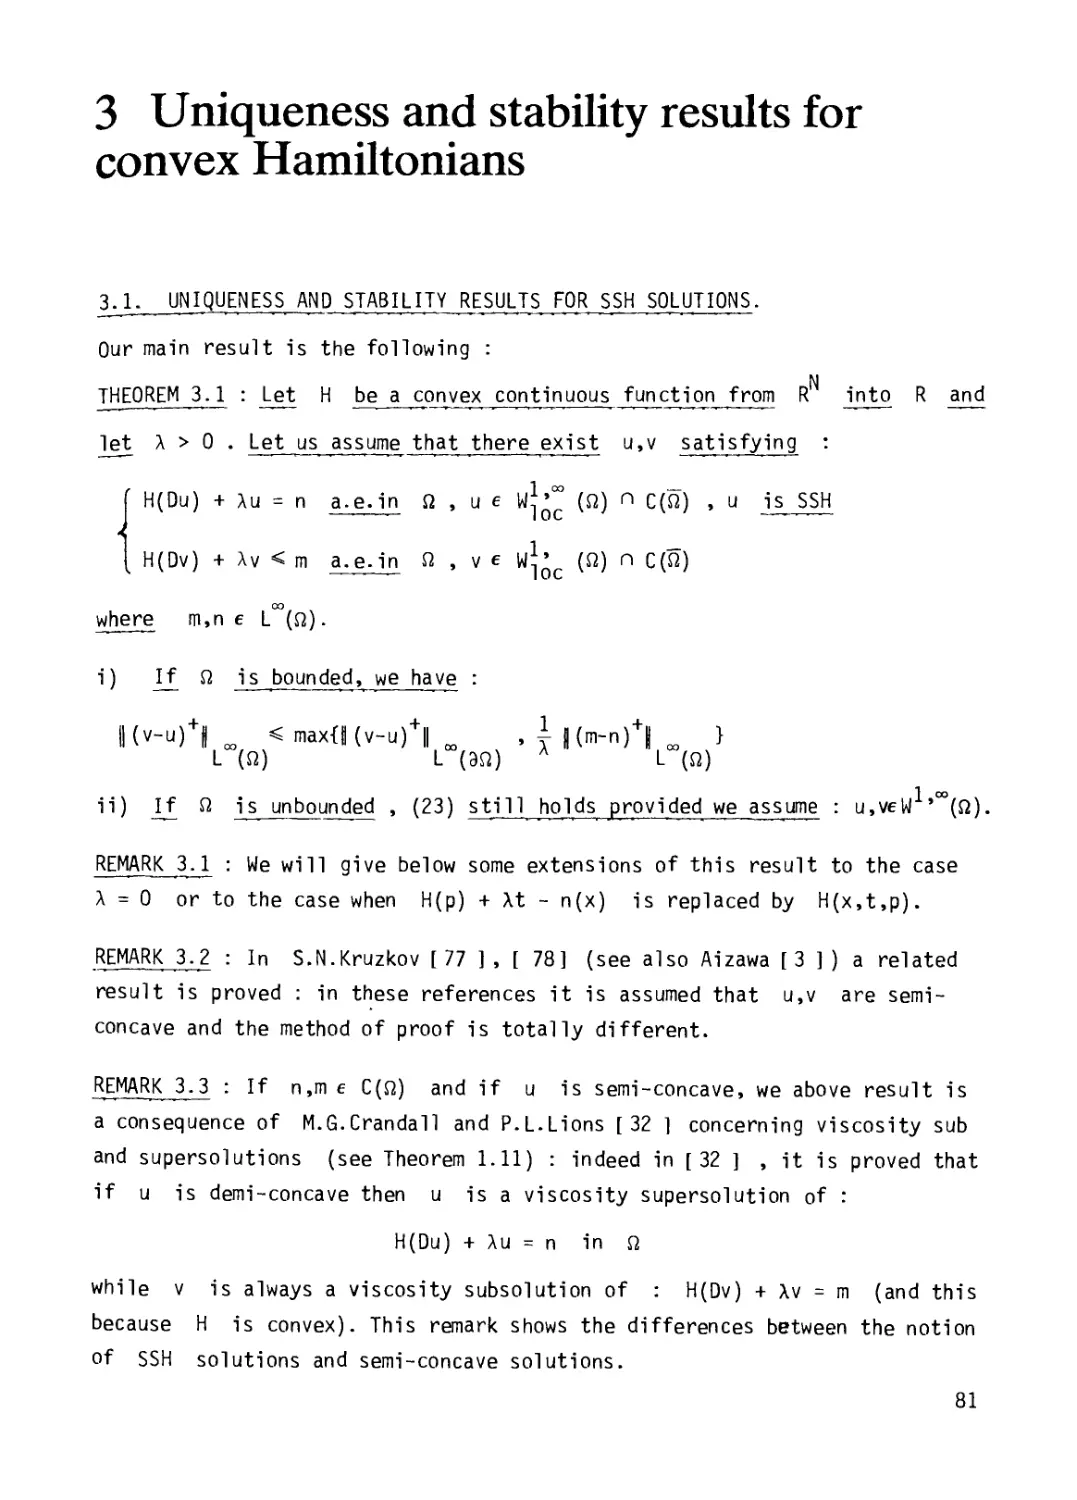 Chapter 3: Uniqueness and stability results for convex Hamiltonians